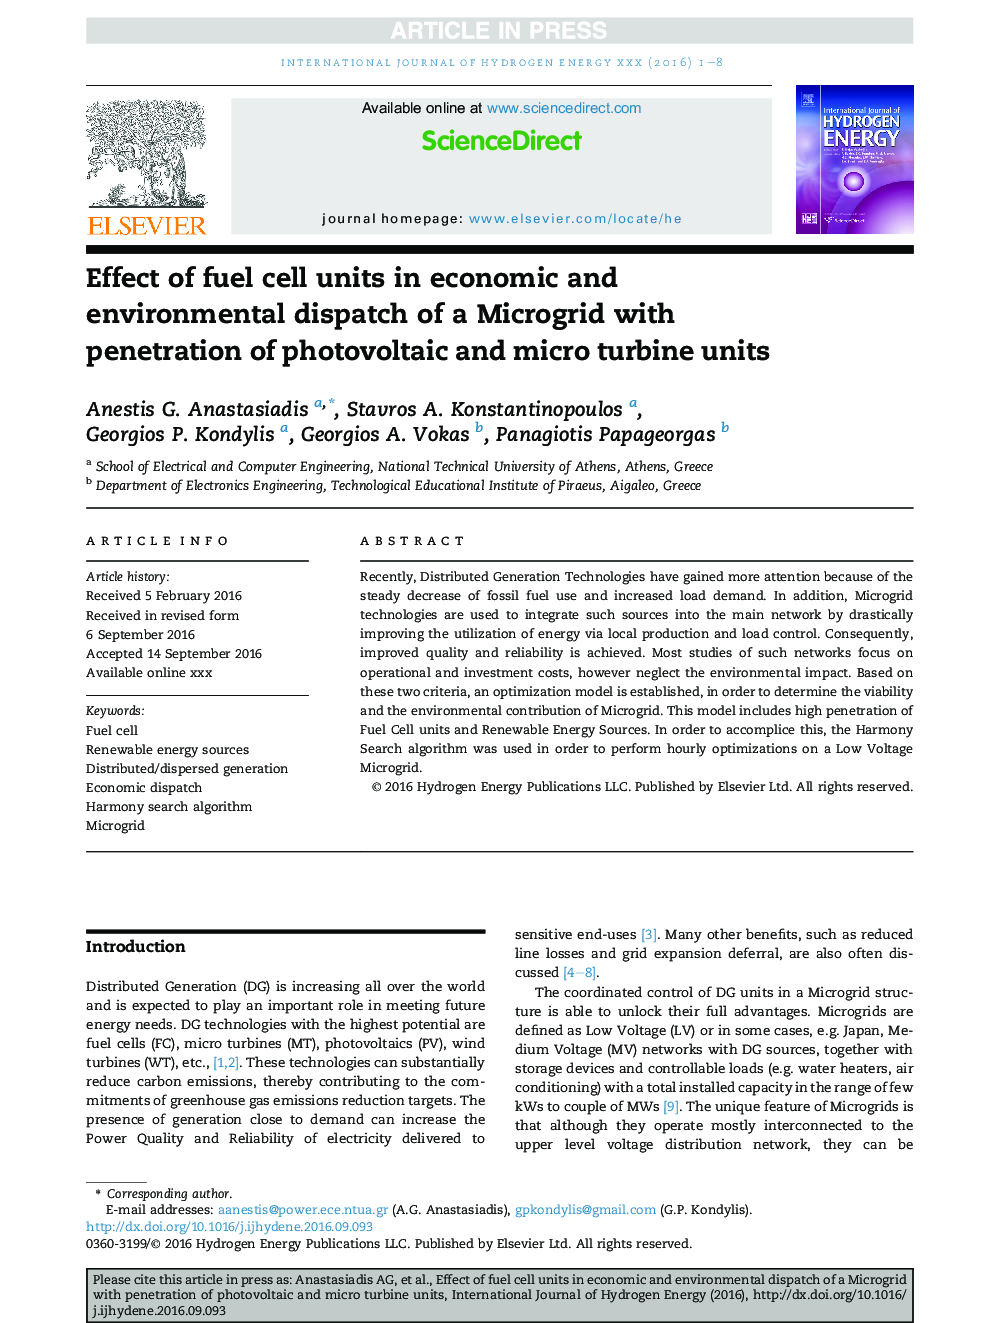 Effect of fuel cell units in economic and environmental dispatch of a Microgrid with penetration of photovoltaic and micro turbine units